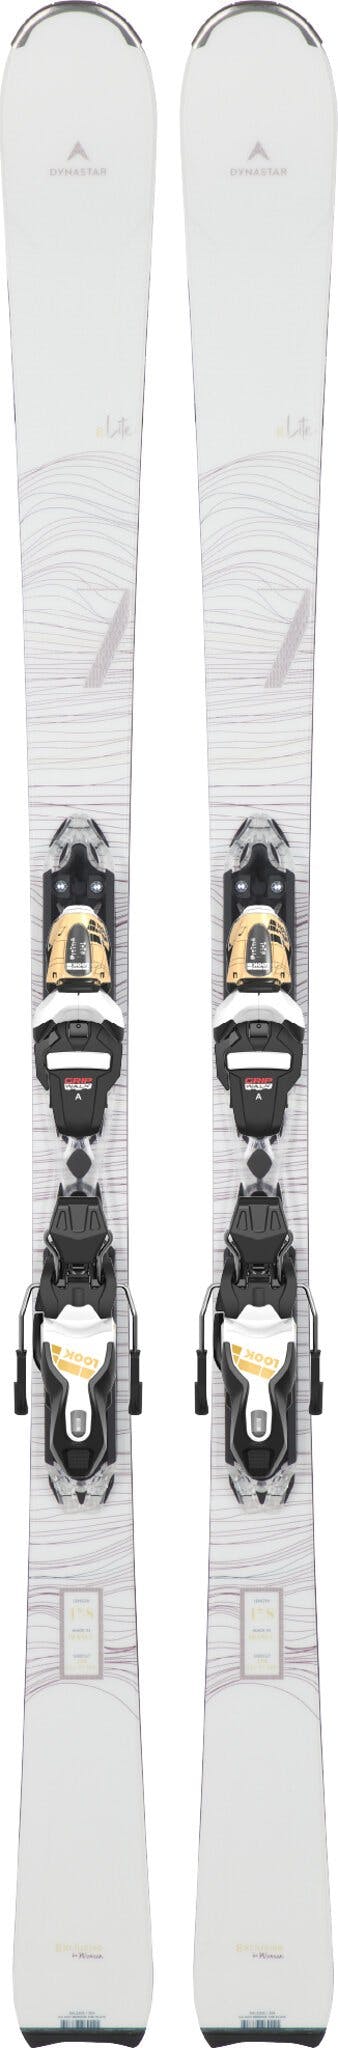 Product image for E Lite 7 Skis with Xpress W 11 GW B83 Binding - Women's